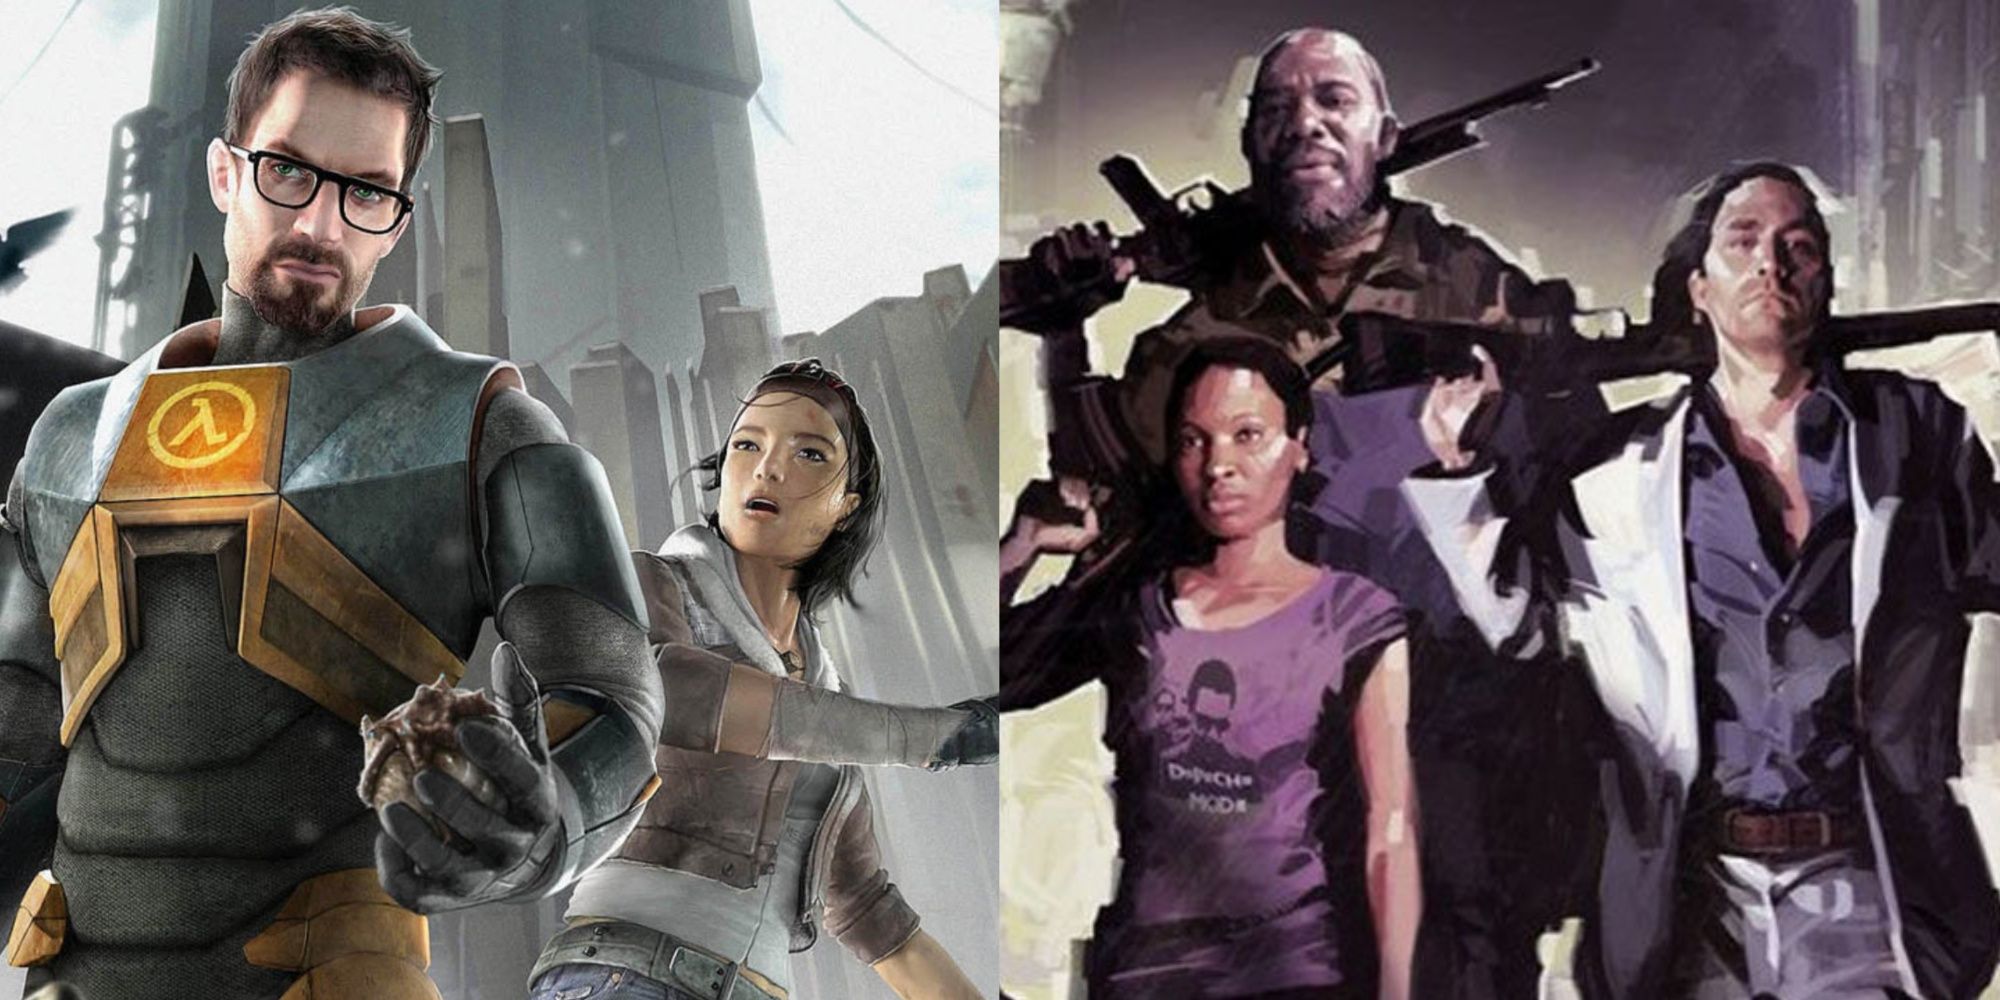 Key art from Half-Life 2 and Left 4 Dead 2.